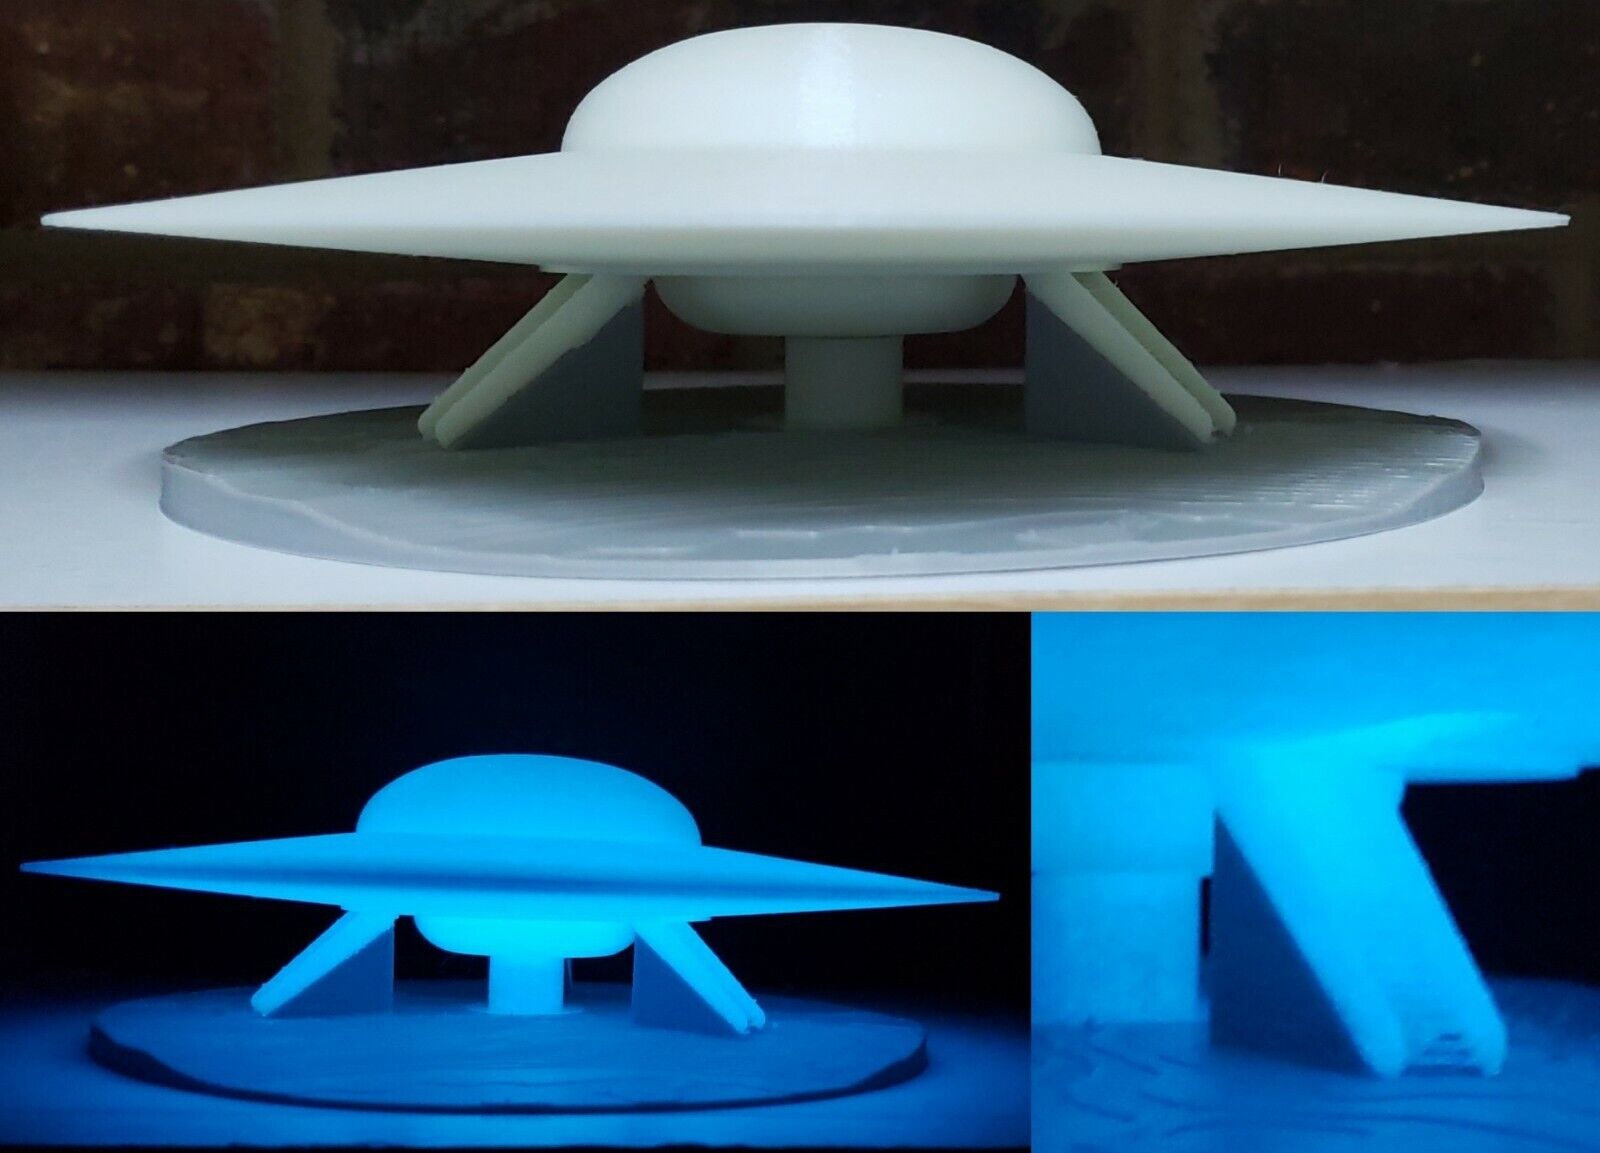 C-57D UFO/Flying Saucer (from Forbidden Planet) -Large Glow-in-the-Dark - Landed